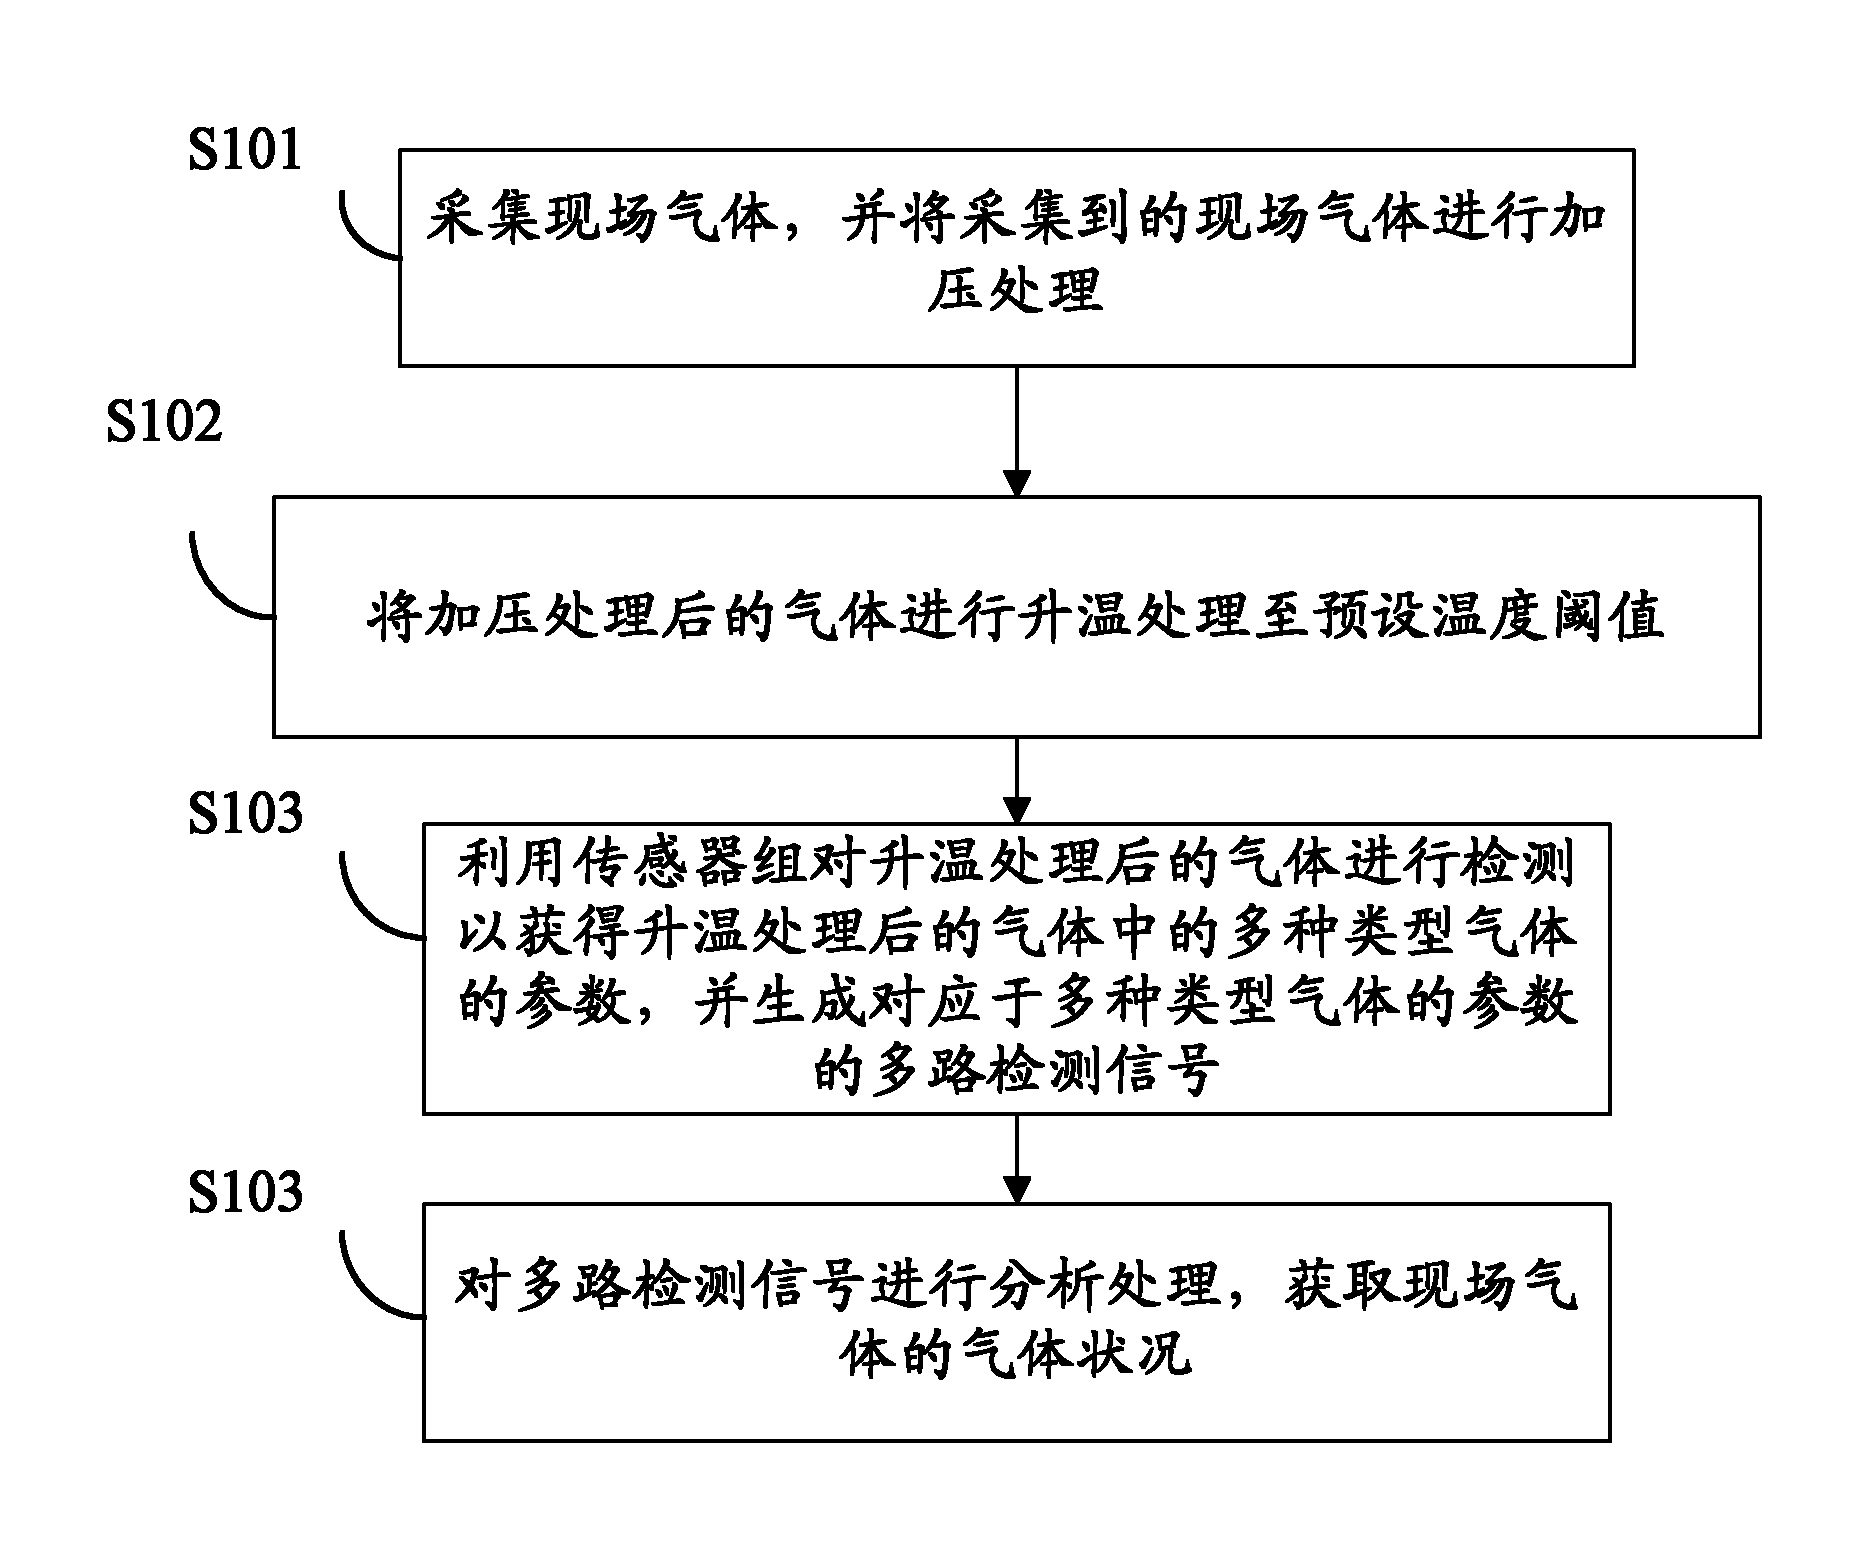 Method and system for monitoring and analyzing air